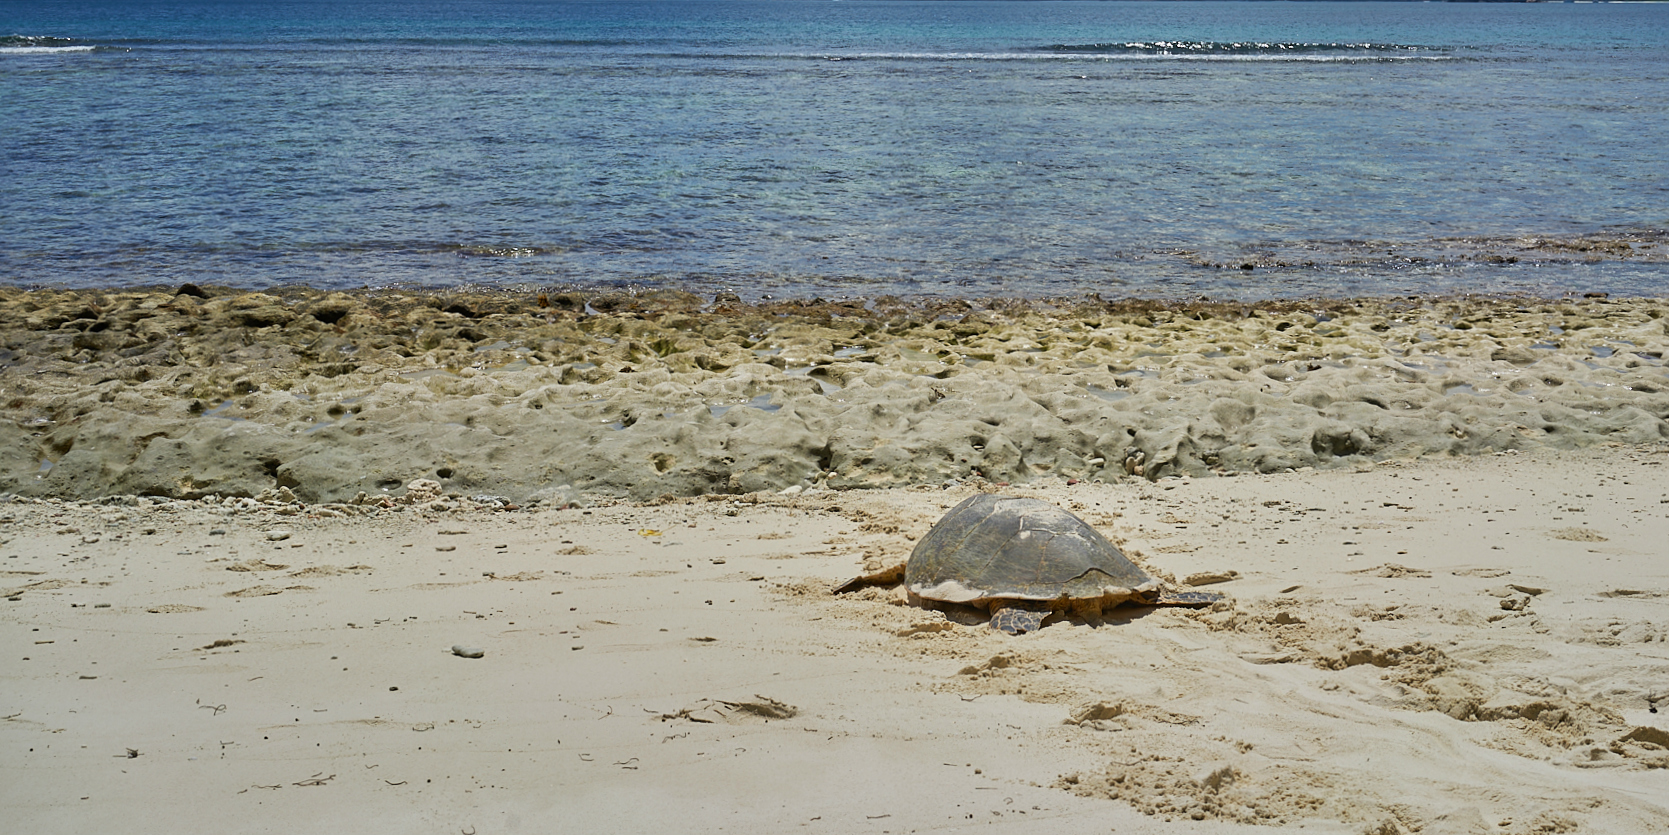 A hawksbill turtle returns to the ocean on Curieuse Island.